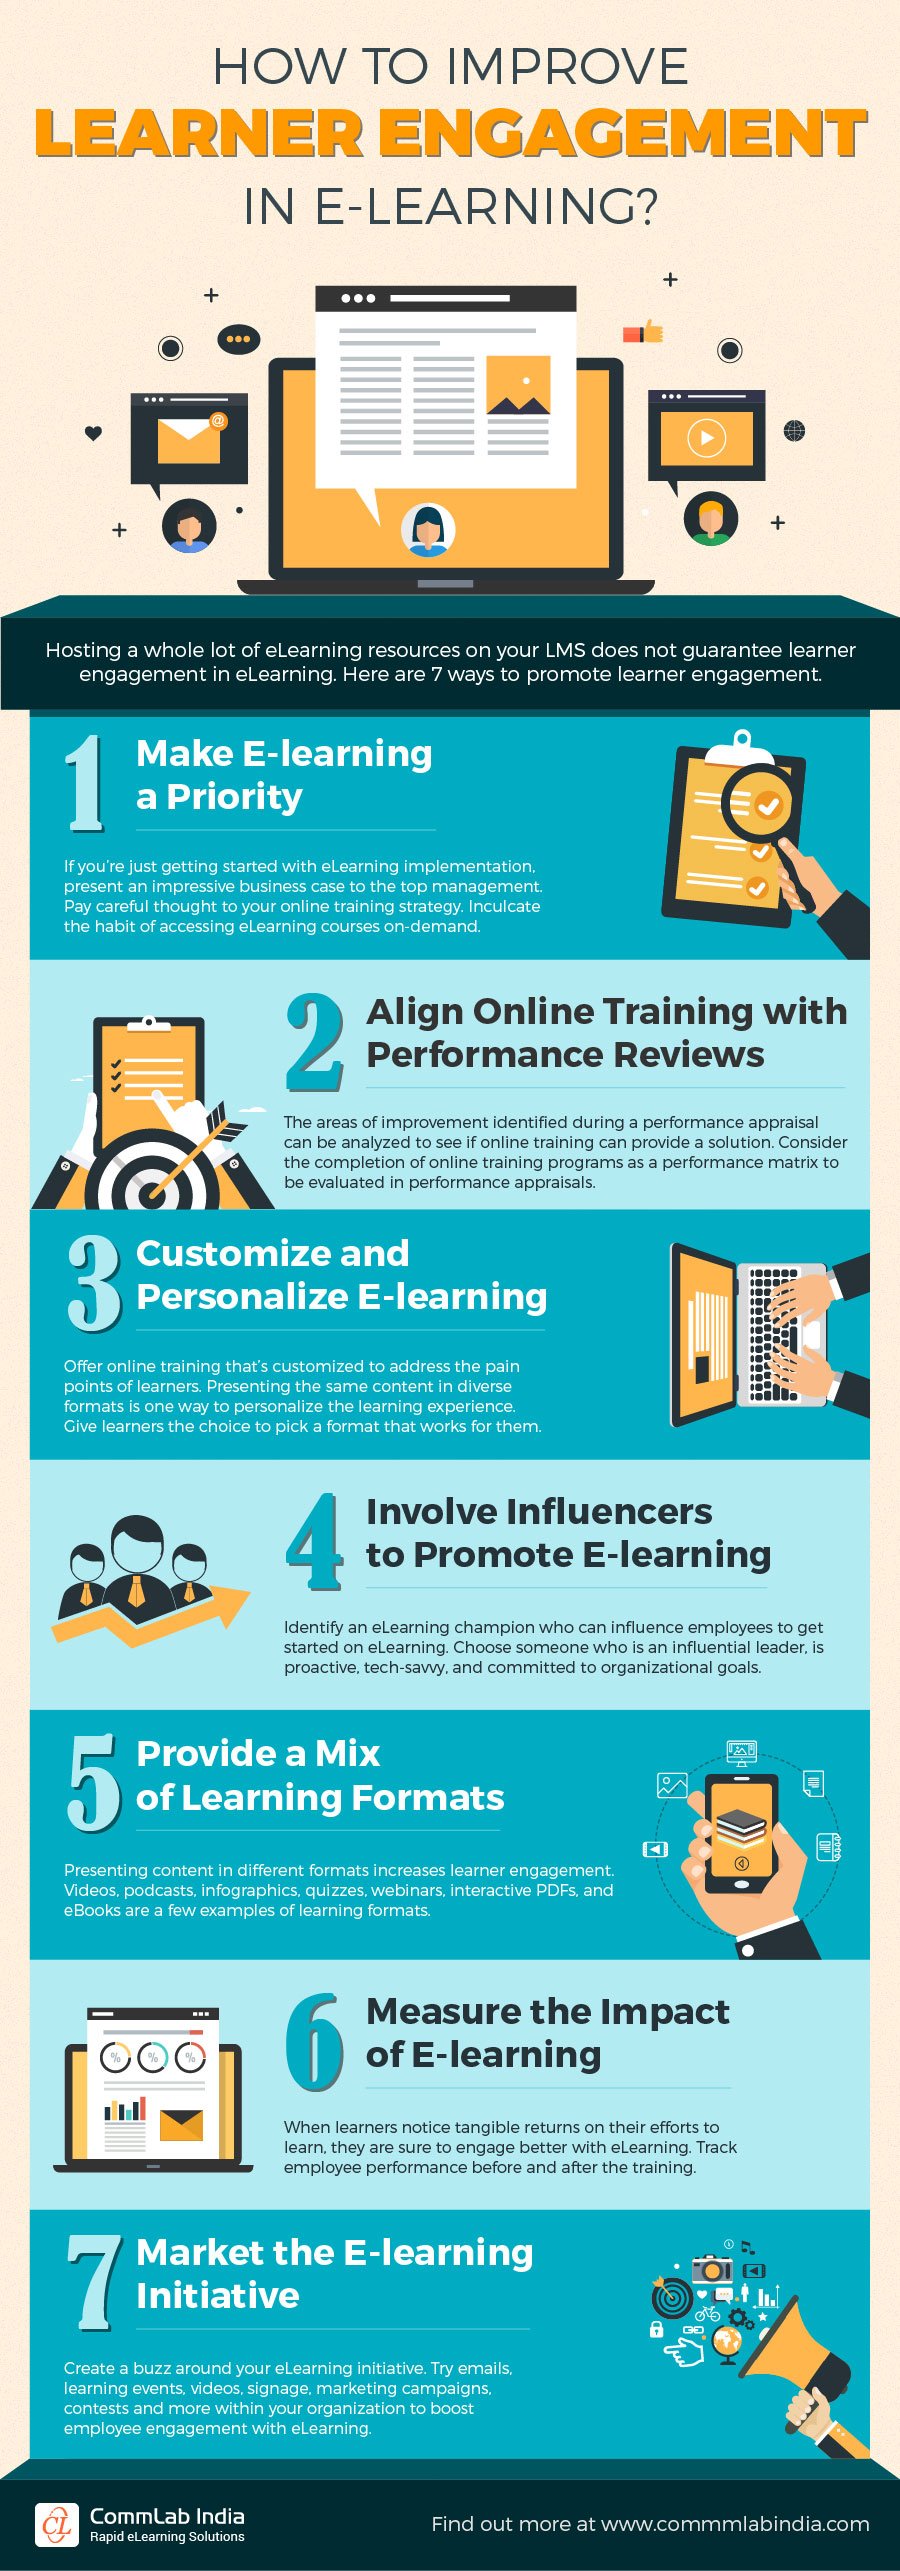 How to Improve Learner Engagement in E-learning? [Infographic]